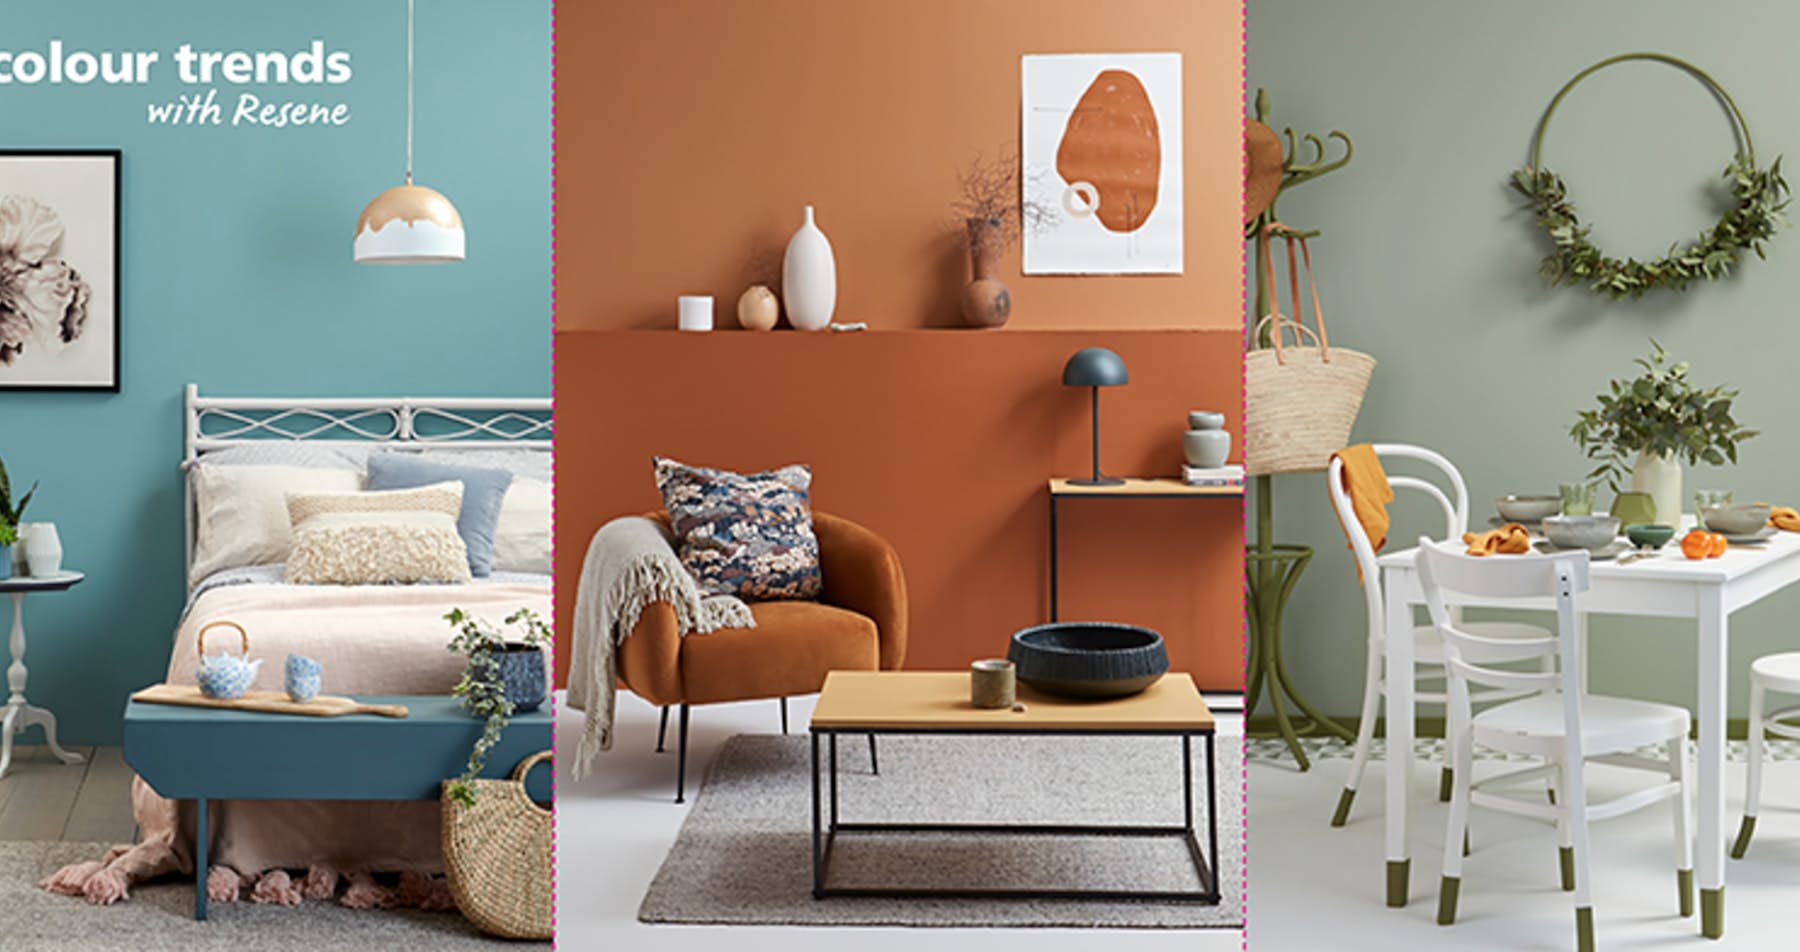 Hot colour trends that are on the rise